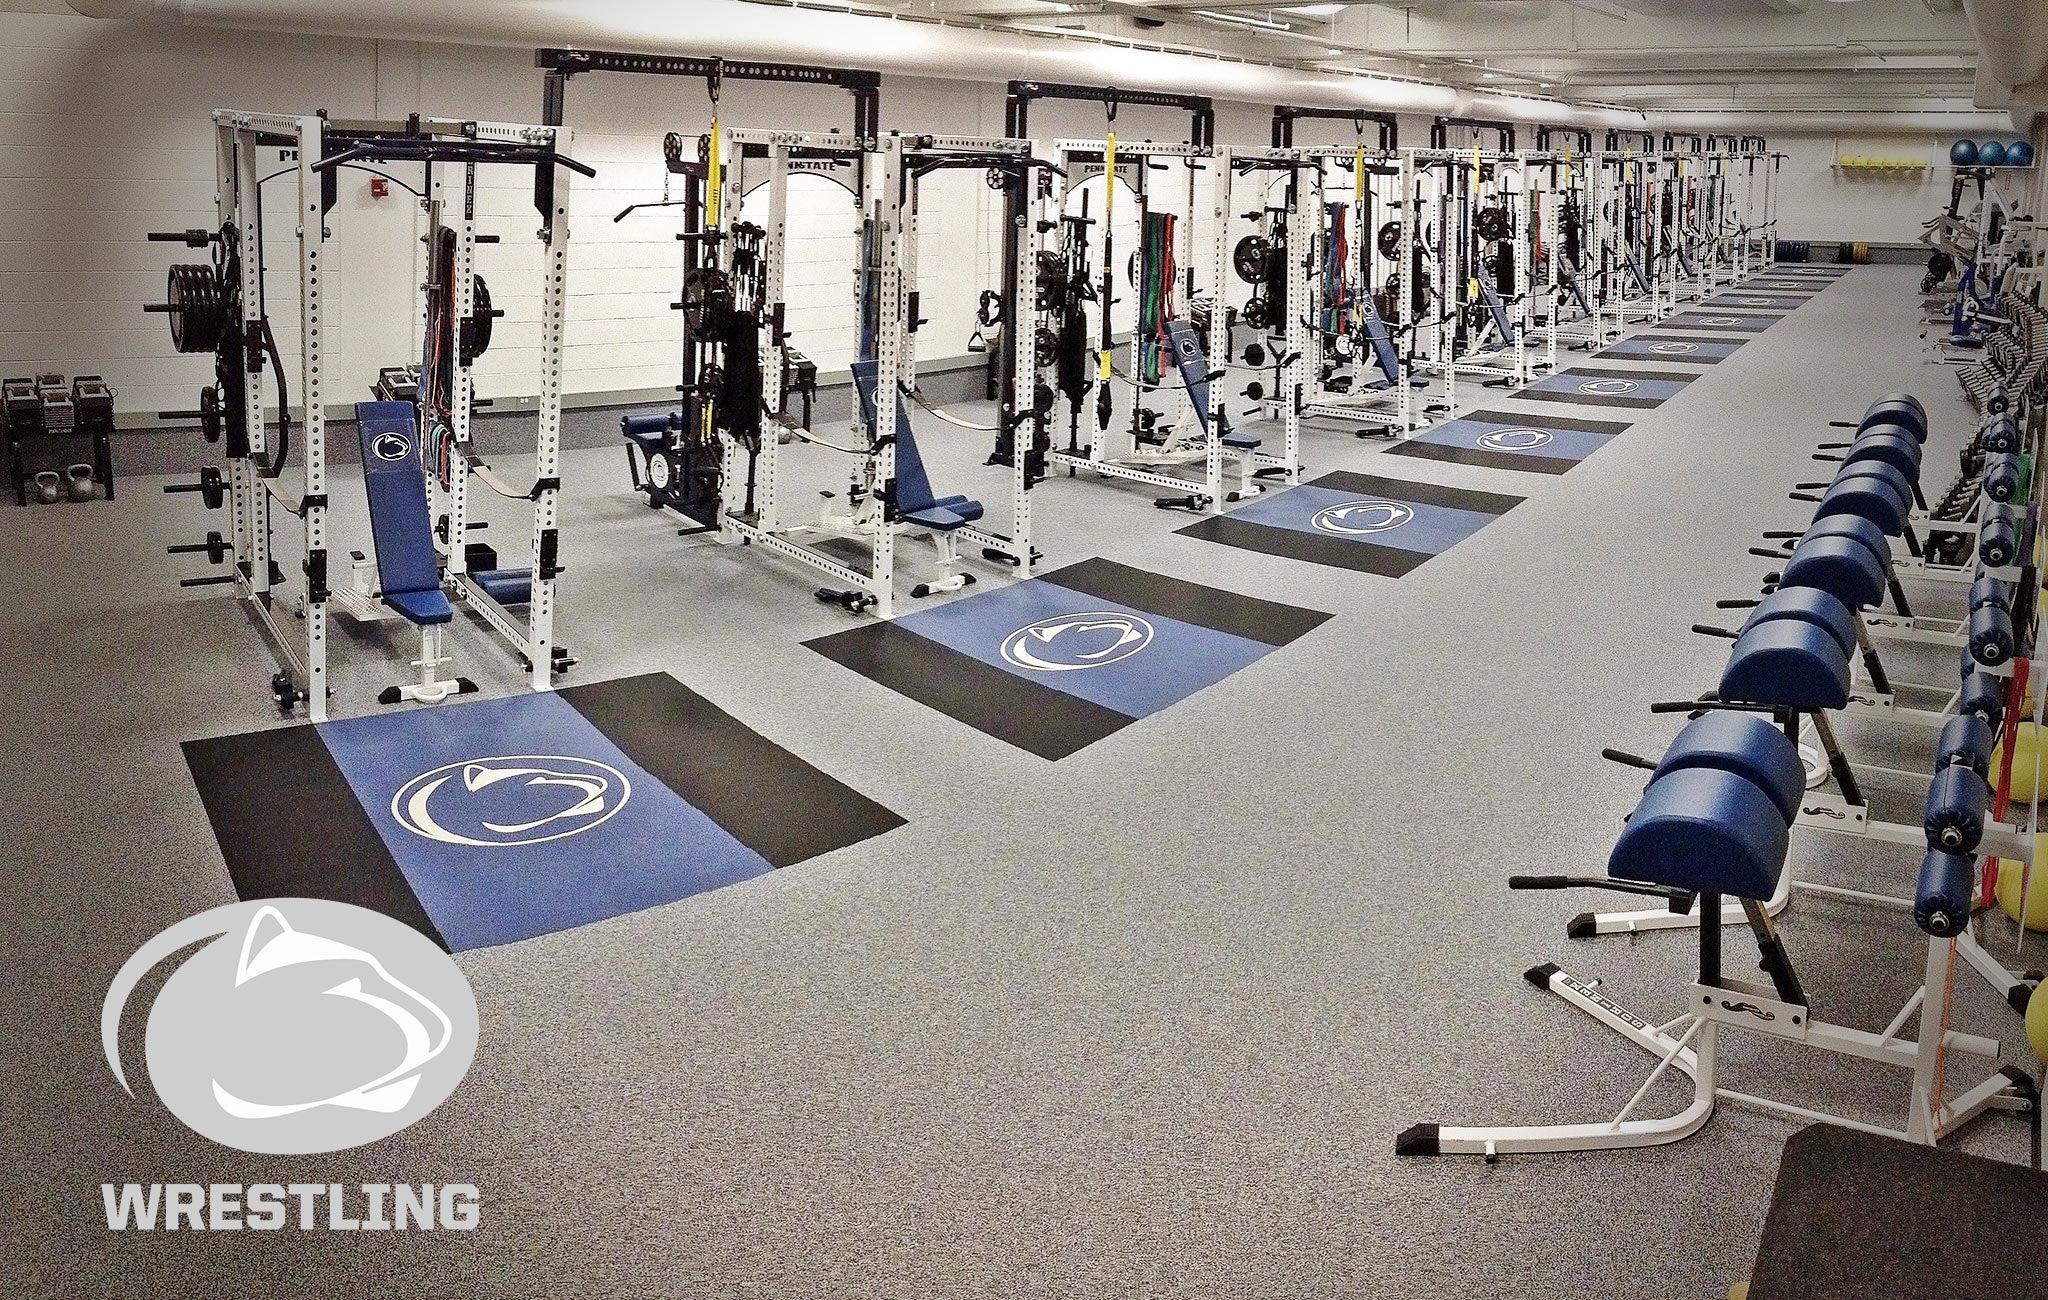 Penn State wrestling Sorinex strength and conditioning facility